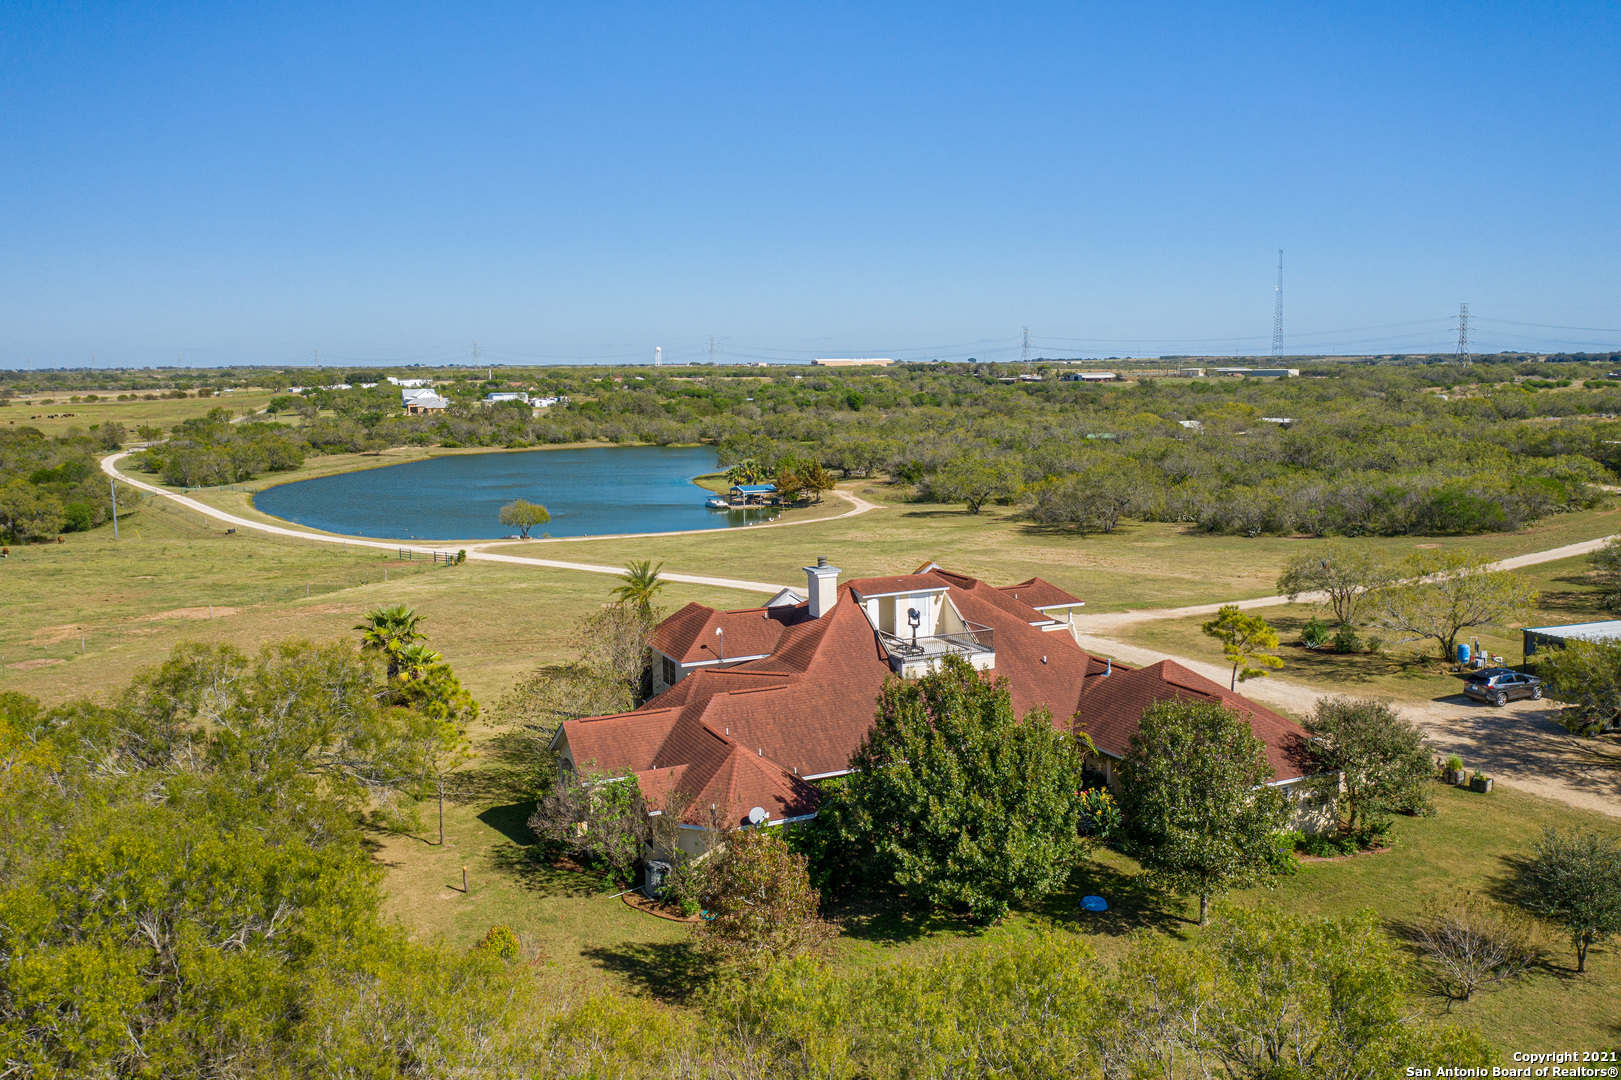 From the Starry Nights to the City Lights this one of a kind Texas Ranch is under 30 minutes to Downtown San Antonio & 1.5 hrs. to Austin! 45.36 Ag Exempt unrestricted acres with a 5 acre fully stocked pond that you can wakeboard on, wild game to hunt, and pasture for grazing!   4,400 Square Ft Custom home that you have to see to appreciate, 3 Walkout terraces to see the magnificent Texas night sky, Custom Solar Farm to go off grid, and 3 custom wells dug throughout the property this place is truly a resort style setup with top quality weight room, media room that you will not find anywhere for this price in the Central Texas corridor. Everything is bigger and better in Texas and it is clear to see why when you see this amazing Estate!